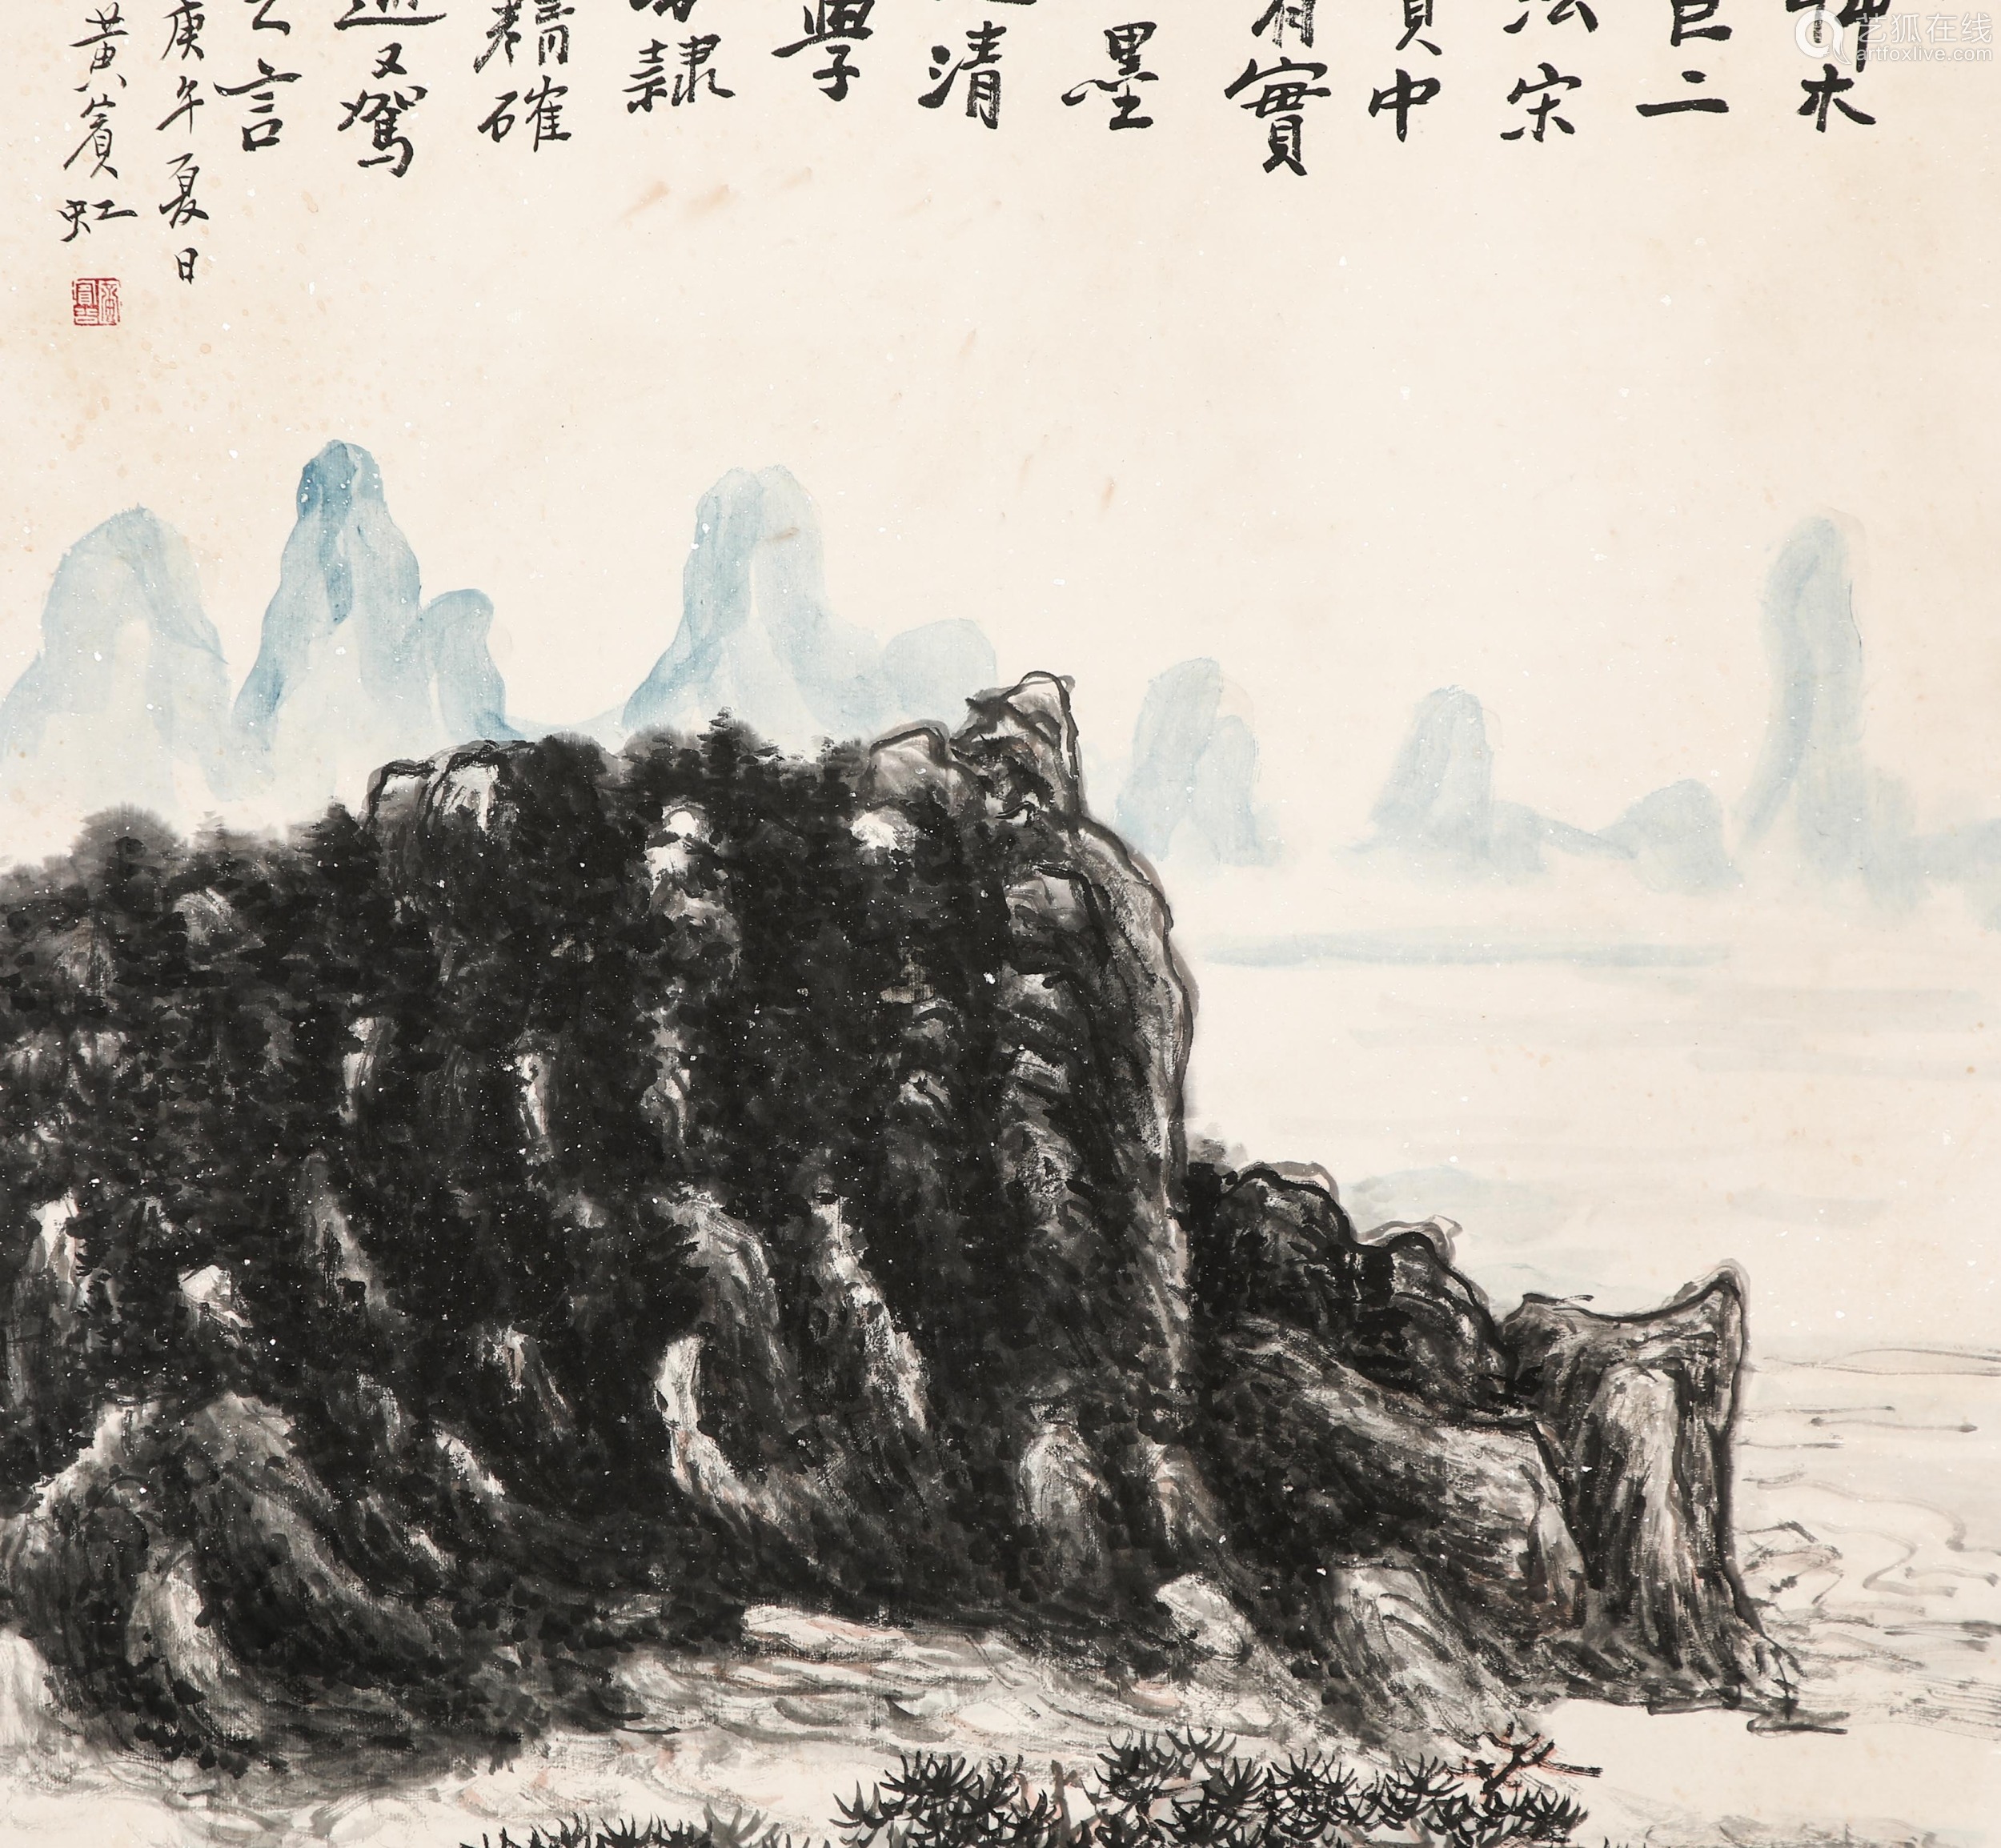 Chinese ink painting,
Huang Binhong's landscape paintings